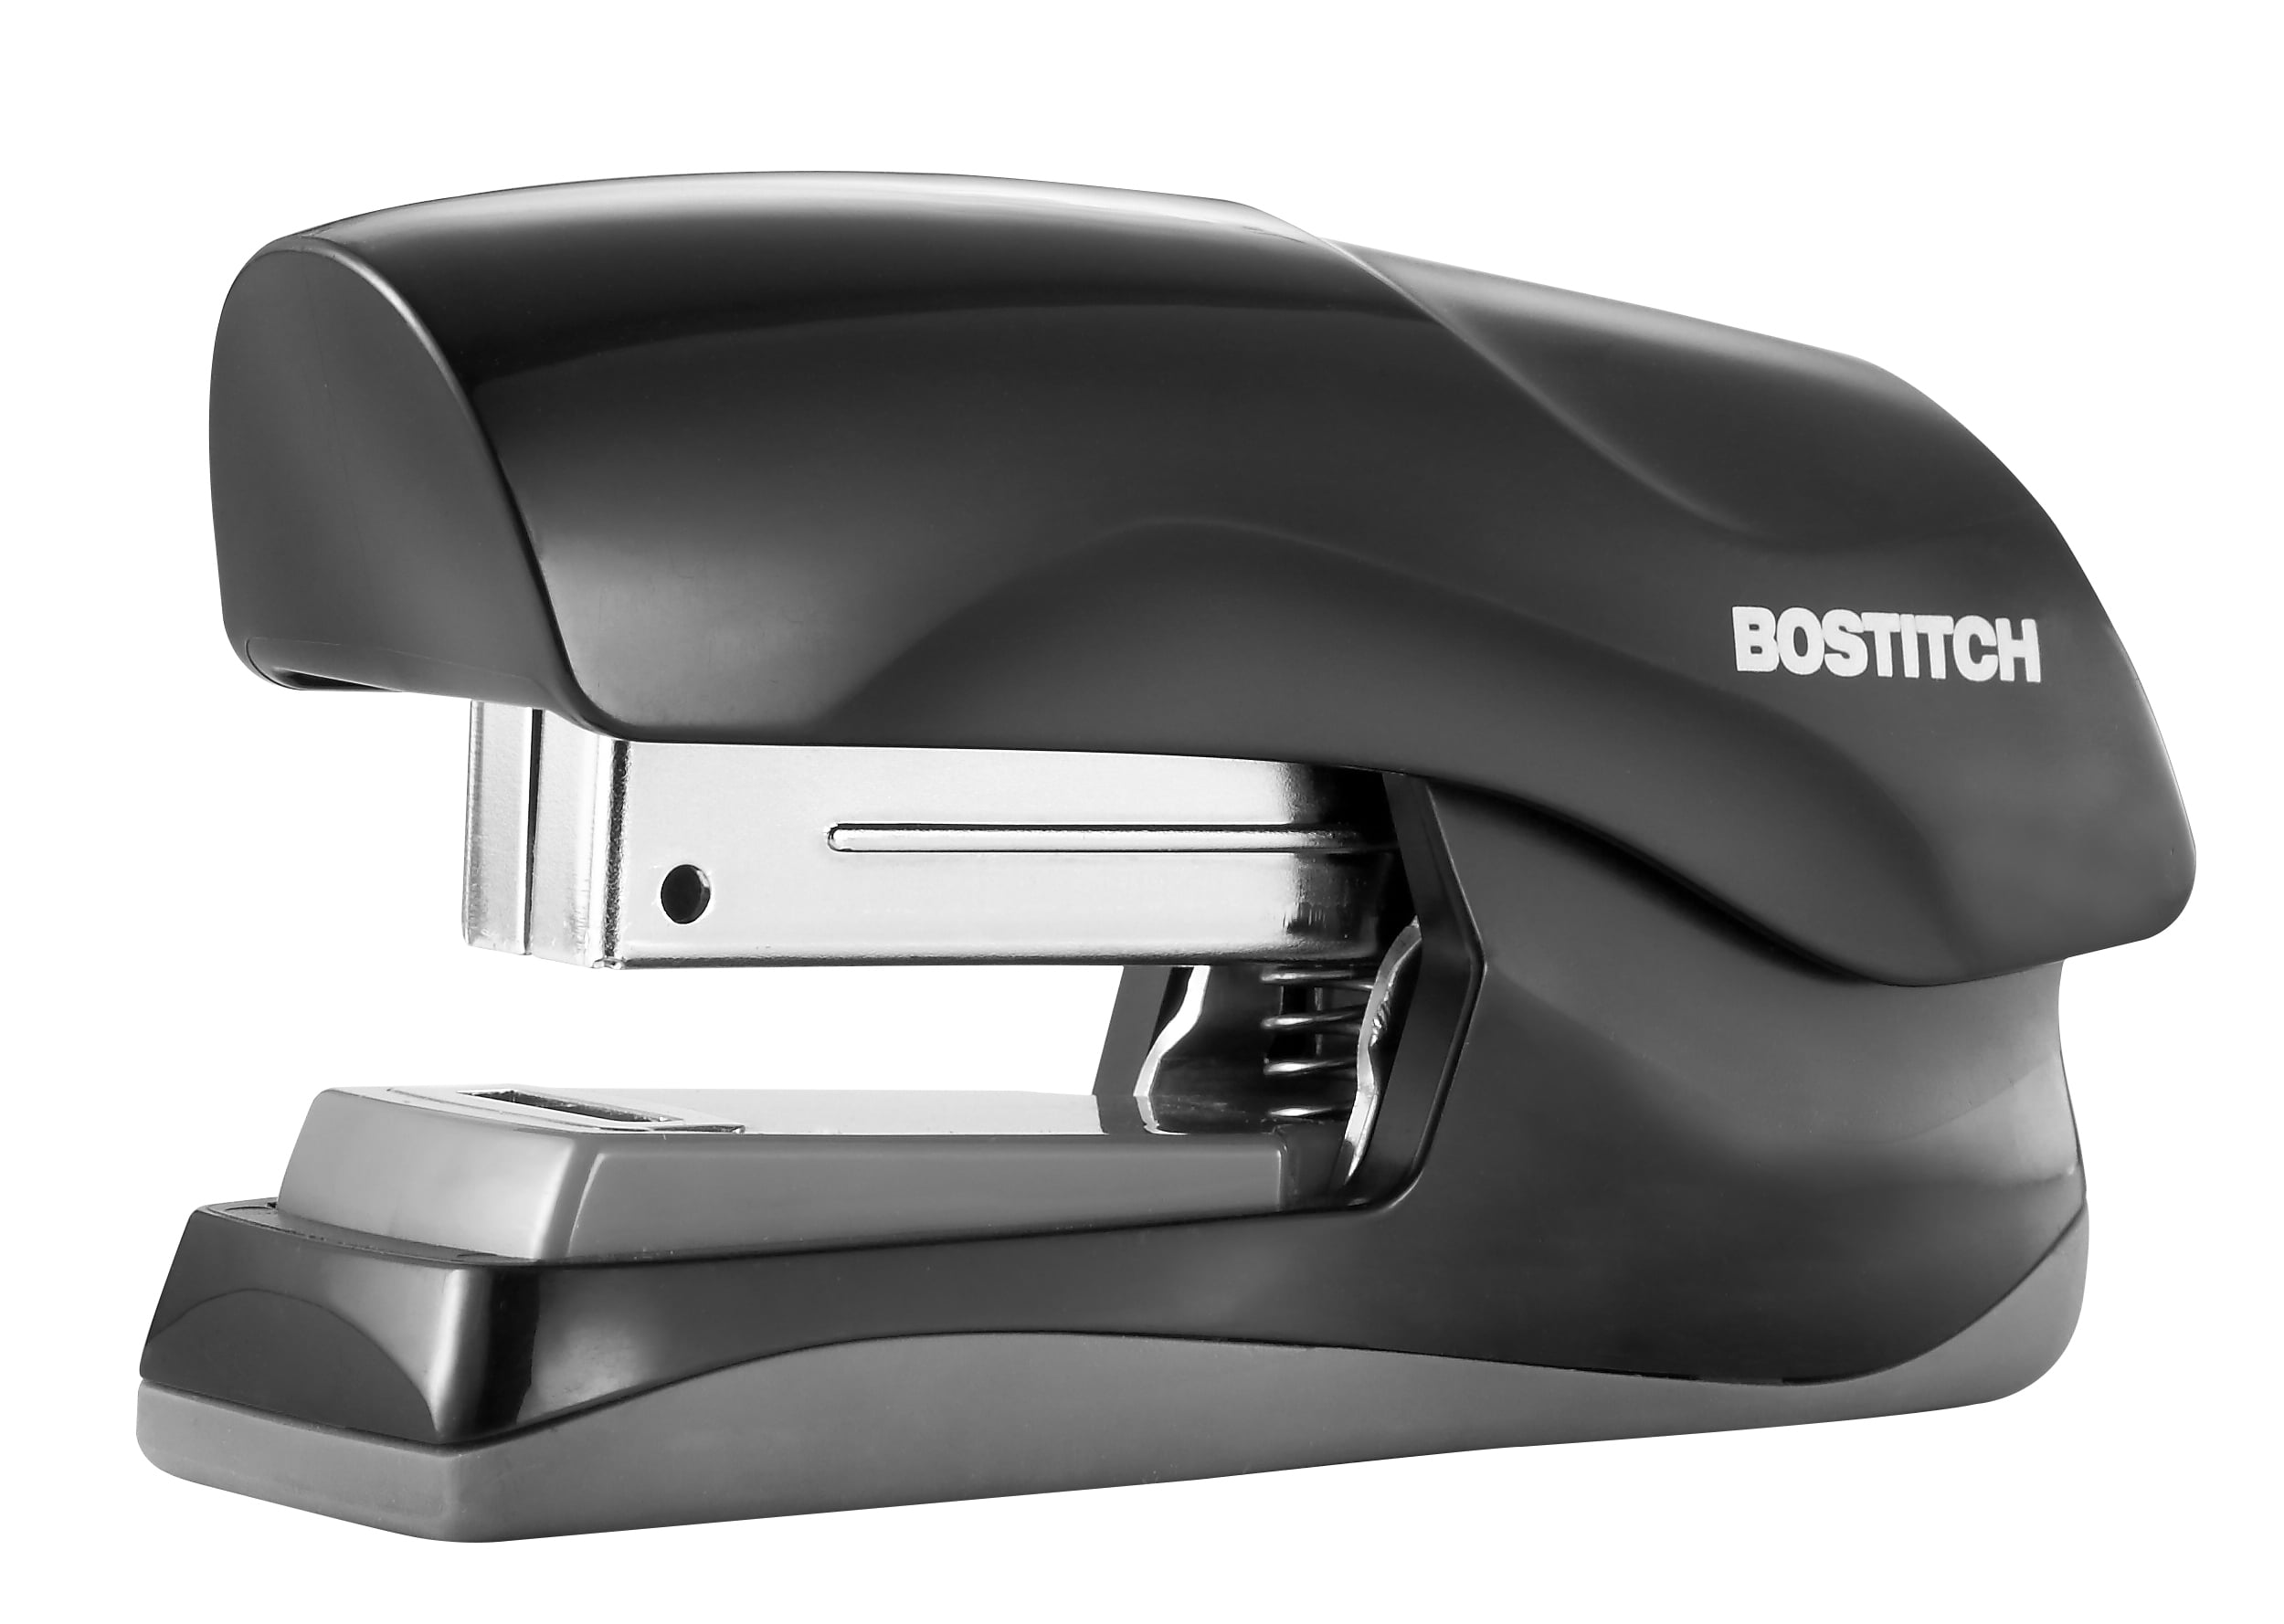 Fits into The Palm of Your Hand; Black Small Stapler Size New Heavy Duty 40 Sheet Stapler B175-BLK